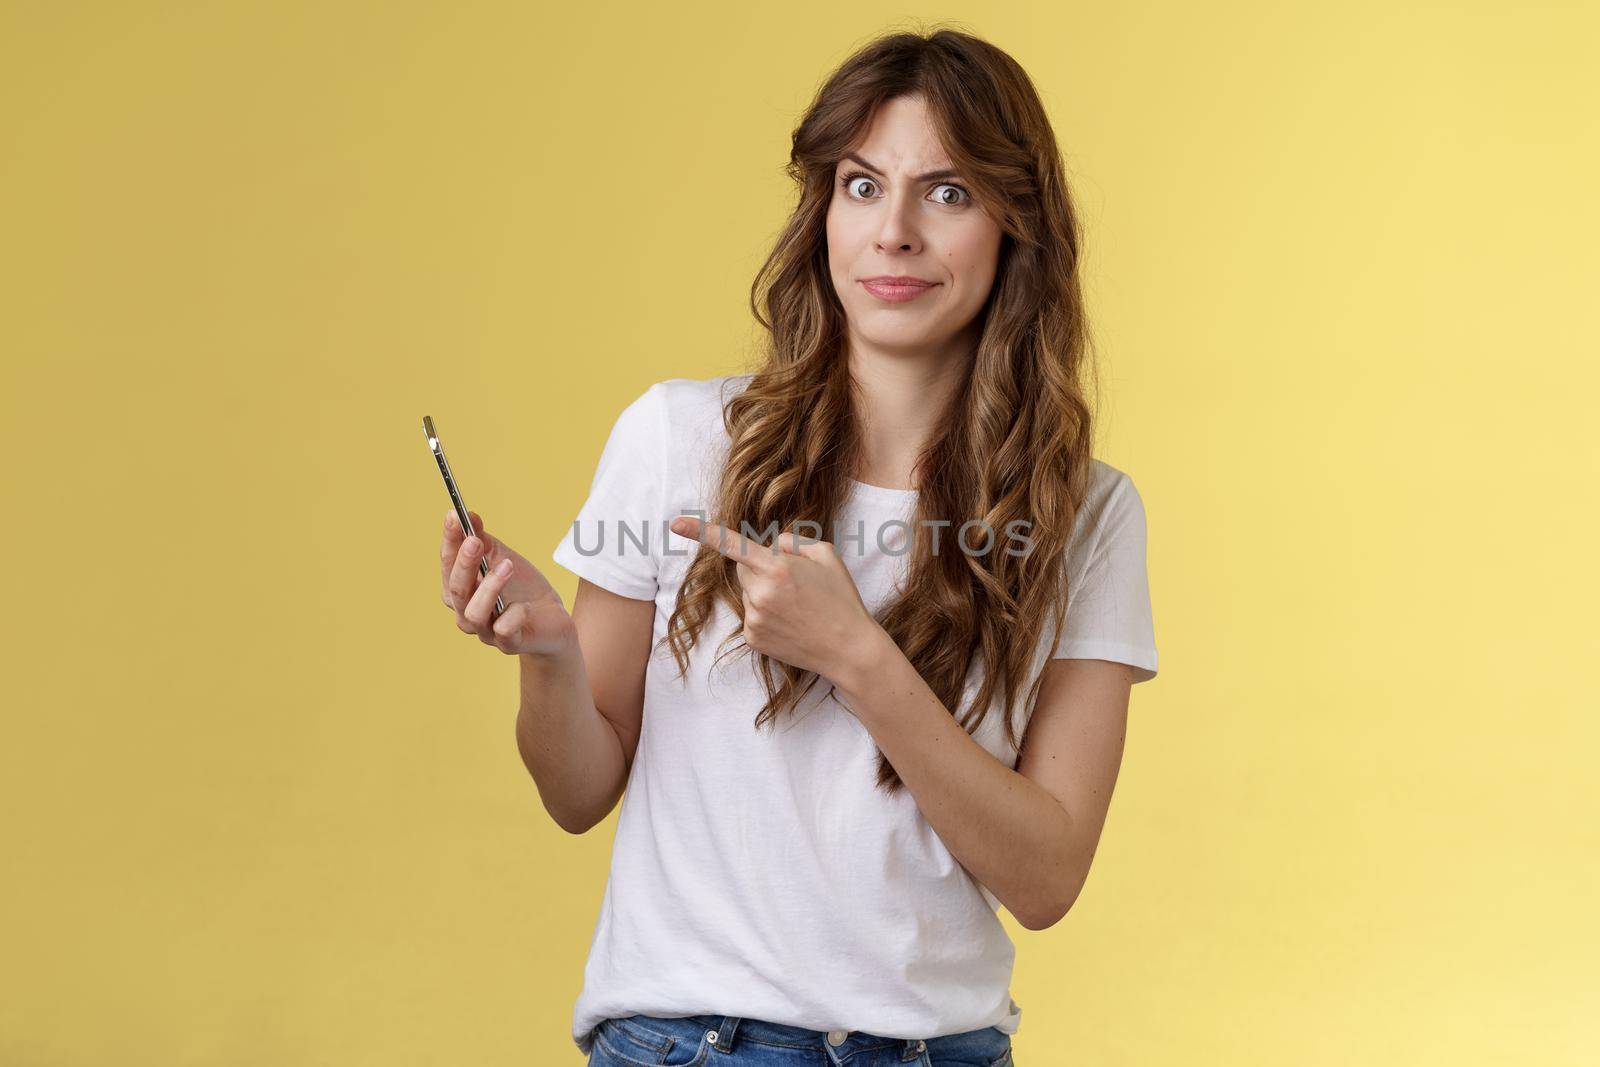 Girl answers strange weird call receive crazy upsetting message cringe doubtful displeased smirking dismay pointing suspicious smartphone stand yellow background intense frustrated.